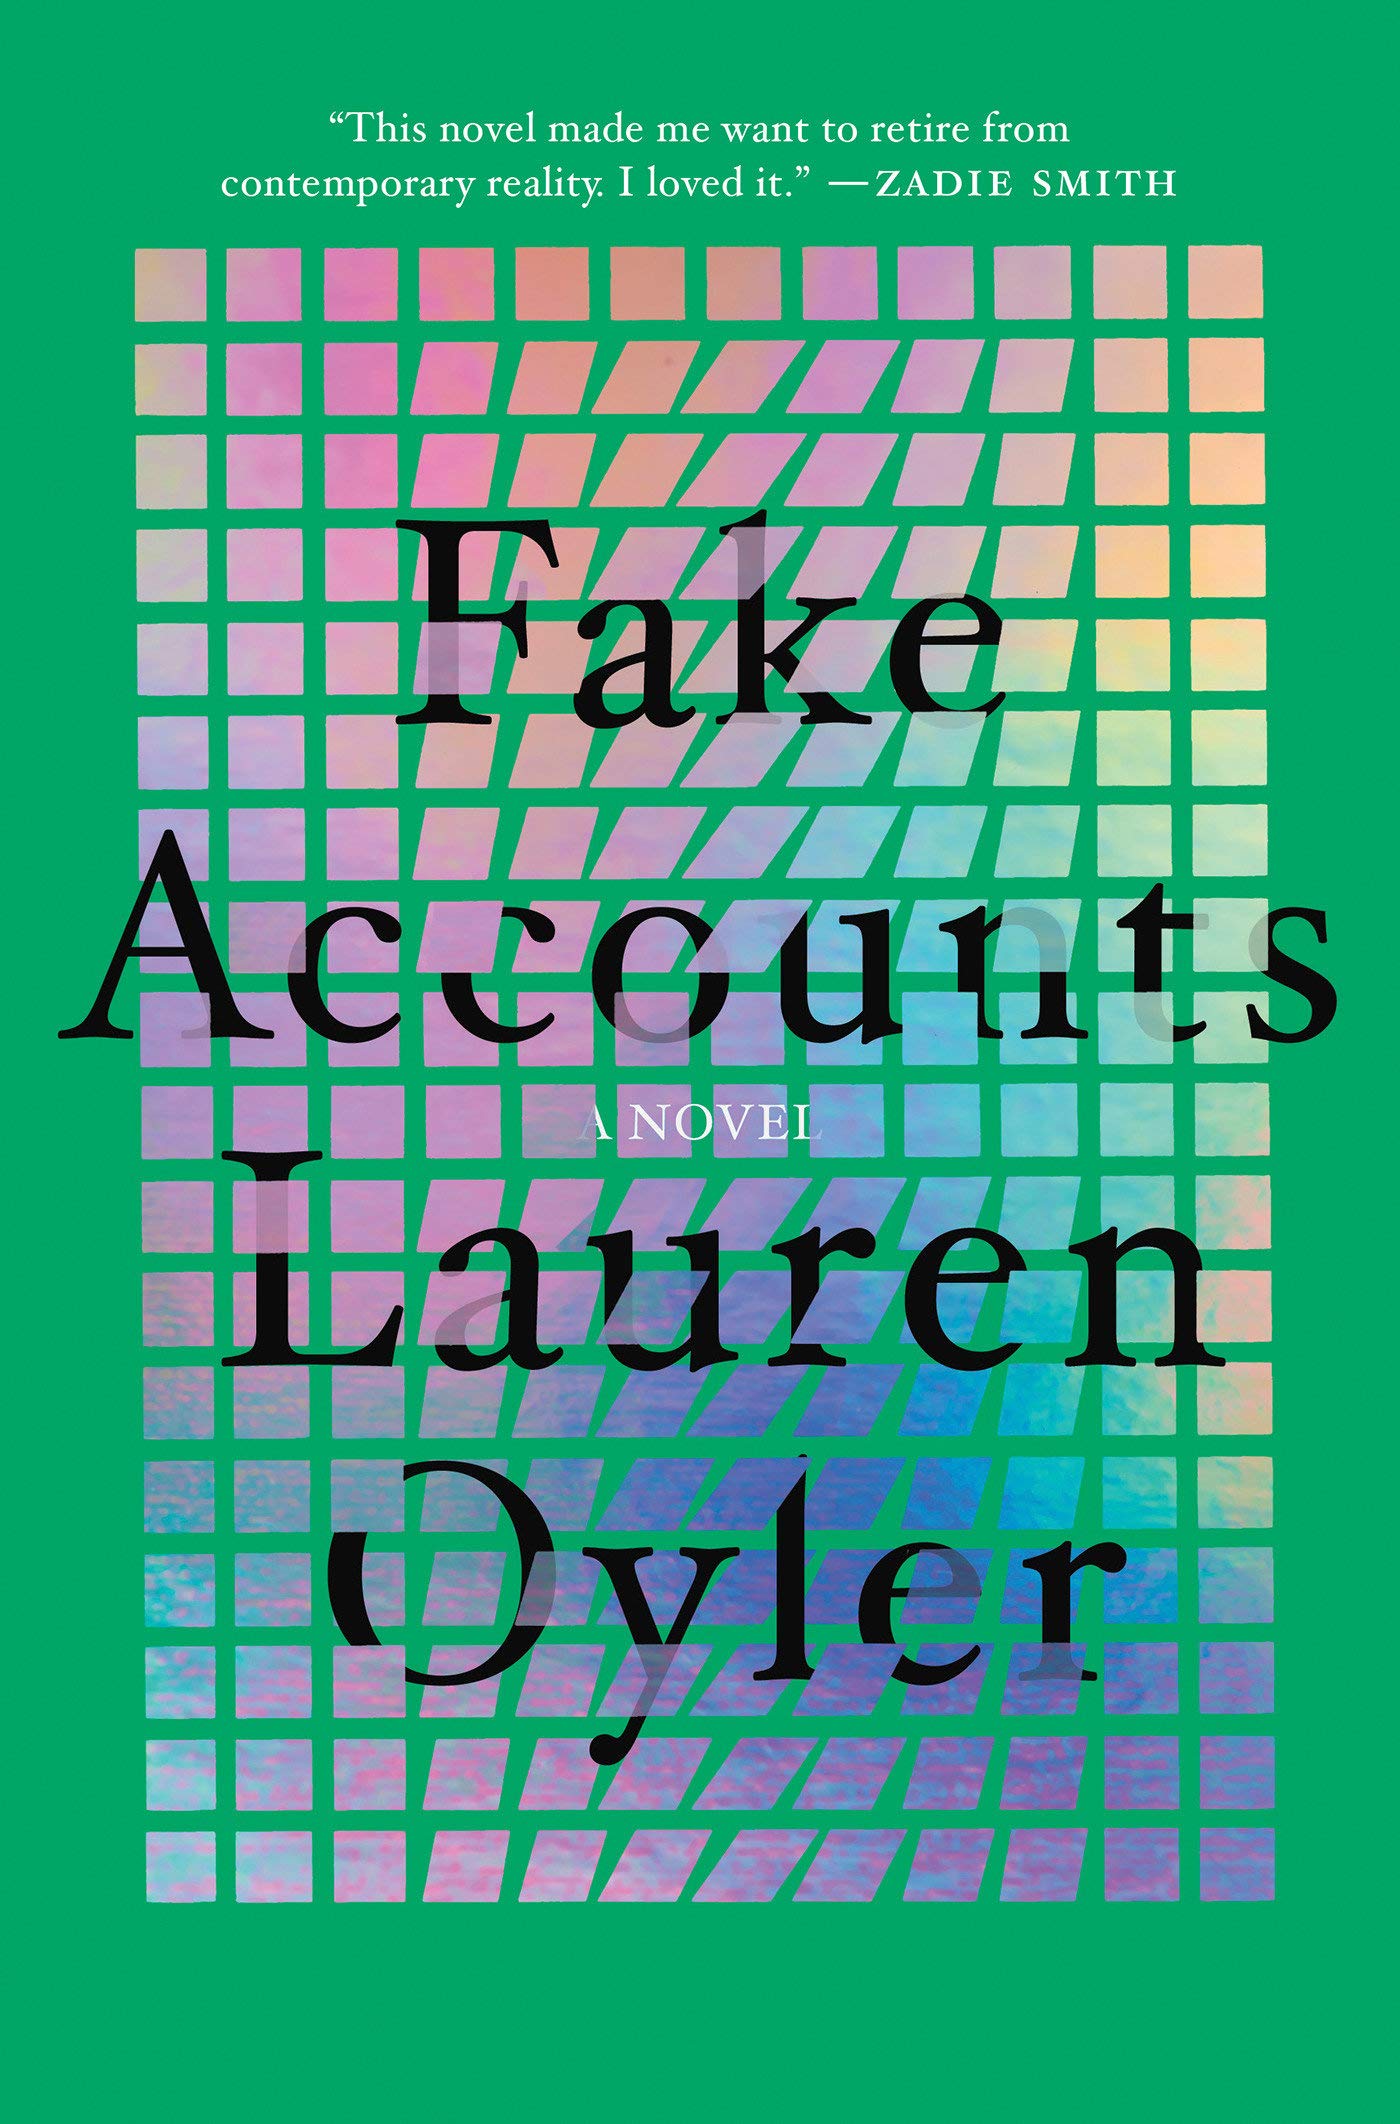 The cover of the book “Fake Accounts,” a novel by Lauren Oyler.